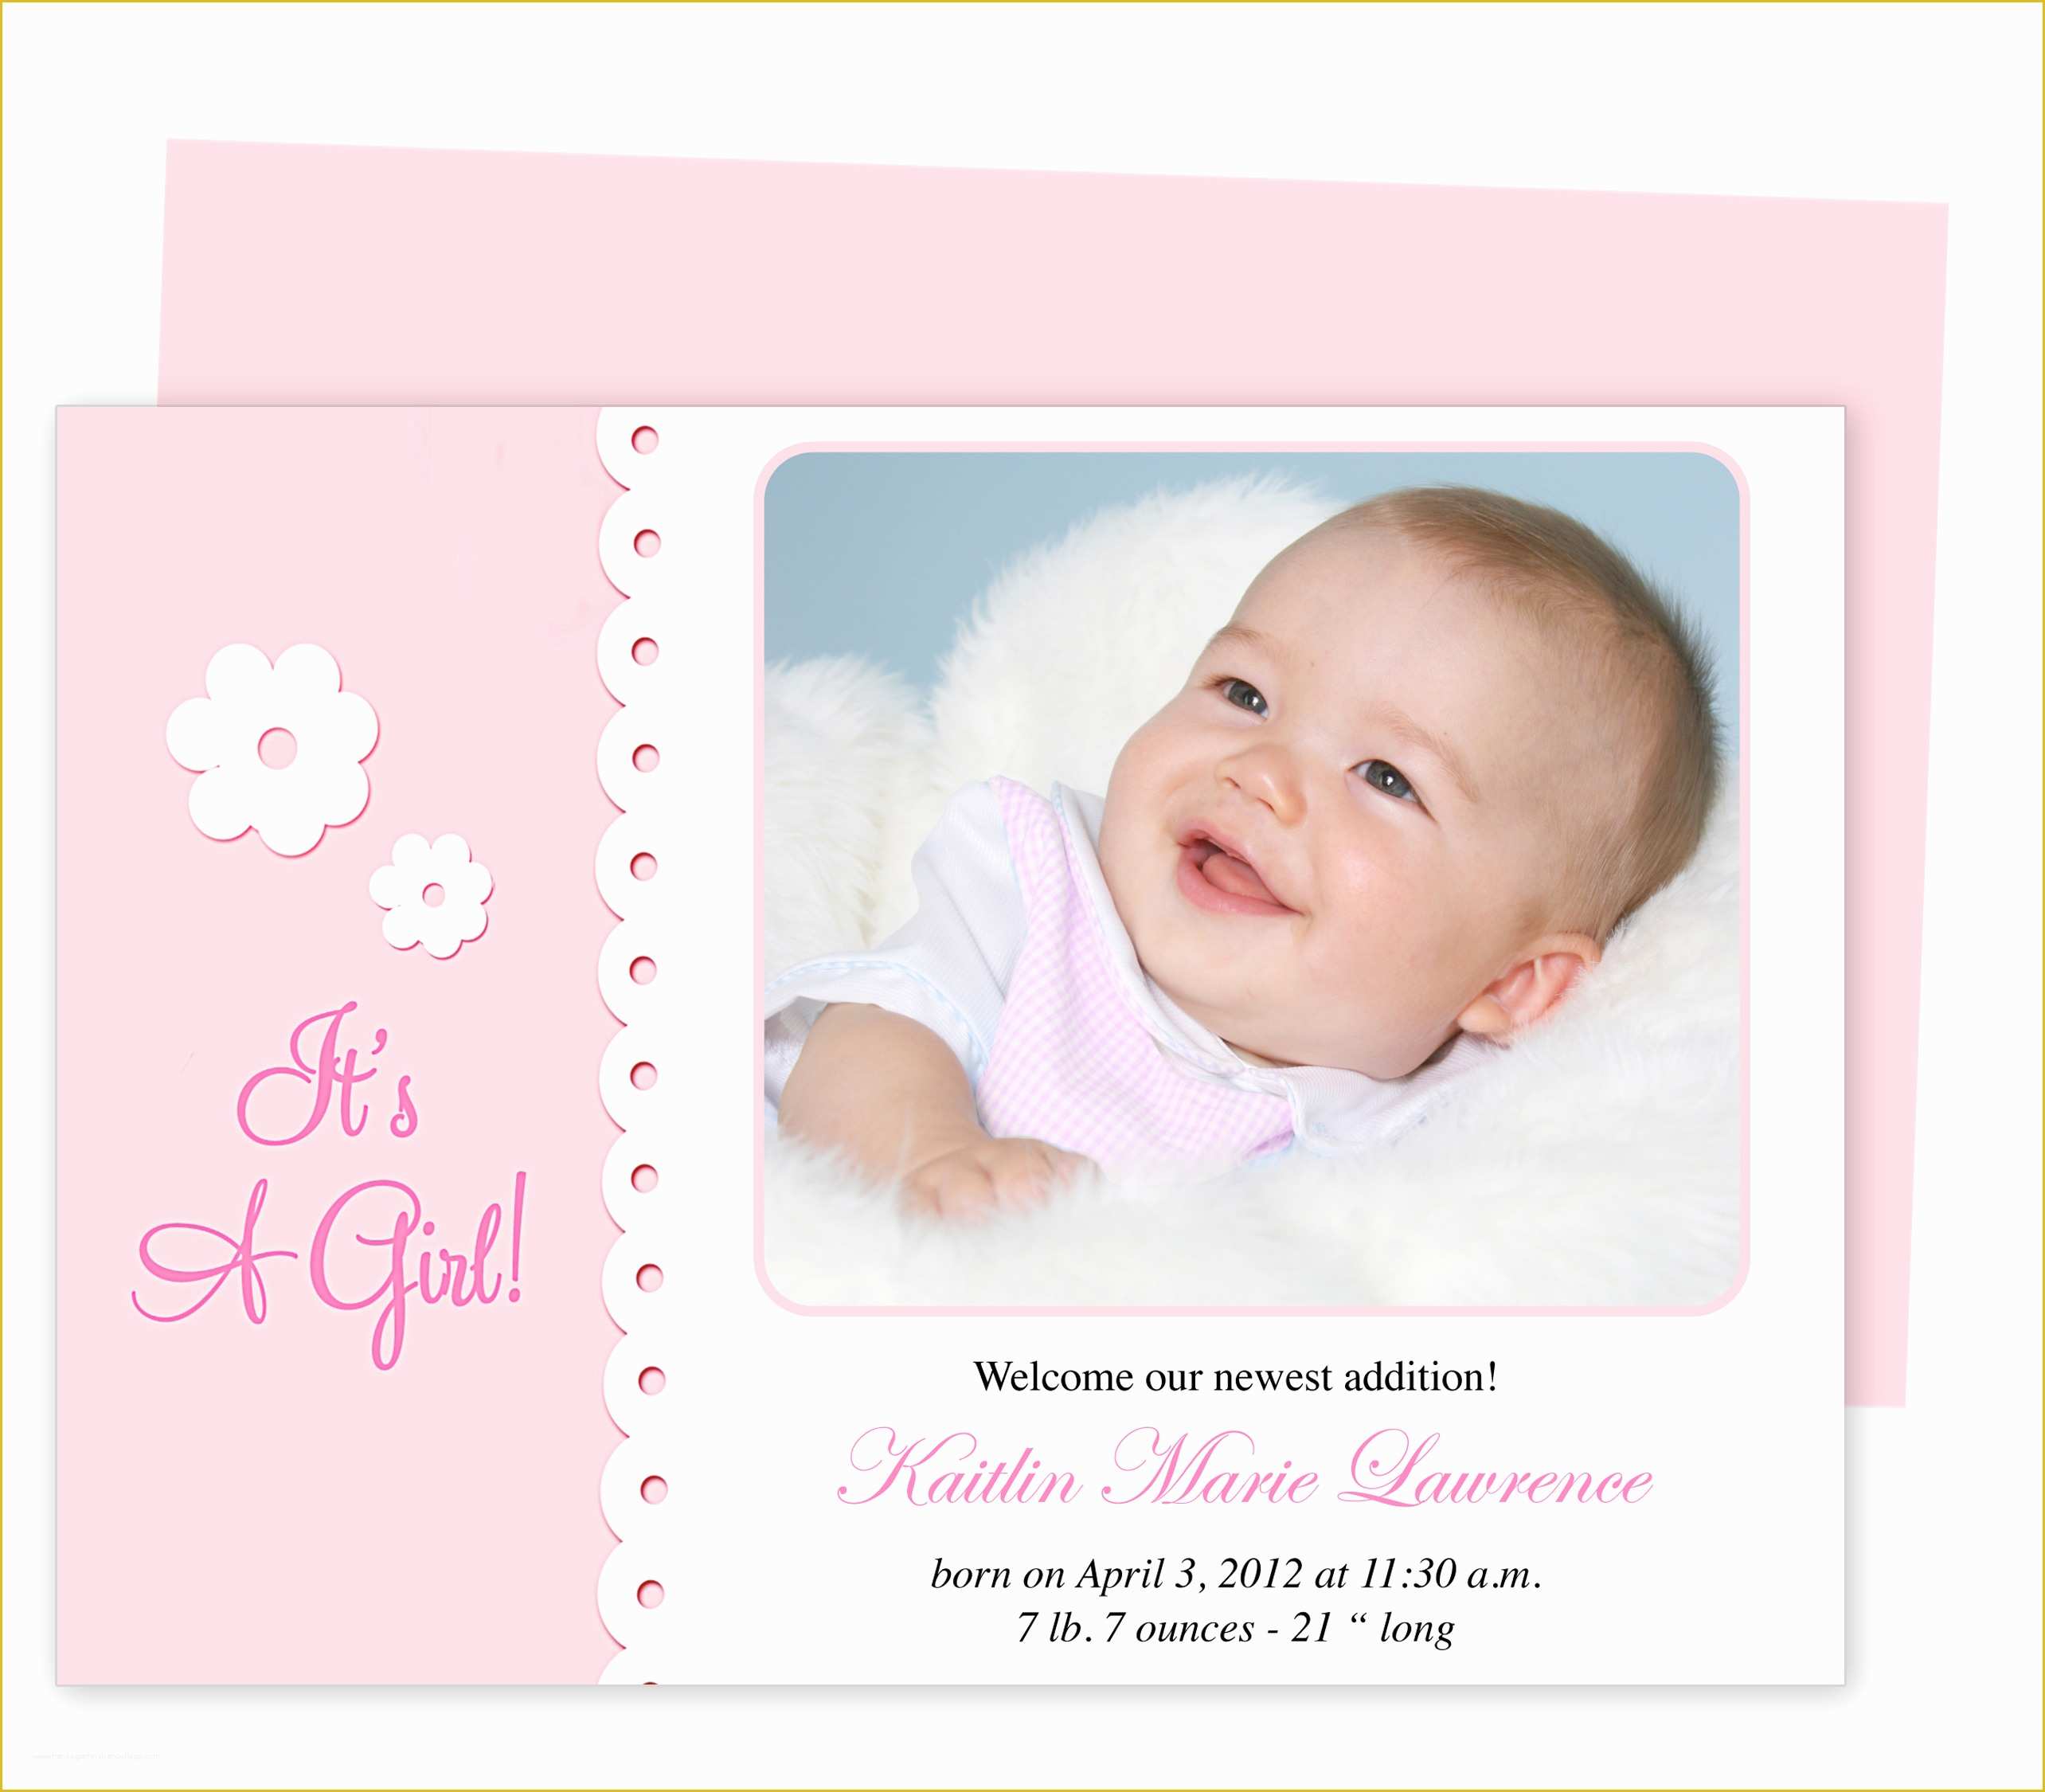 Free Birth Announcement Template Of Birth Announcement Pictures Driverlayer Search Engine